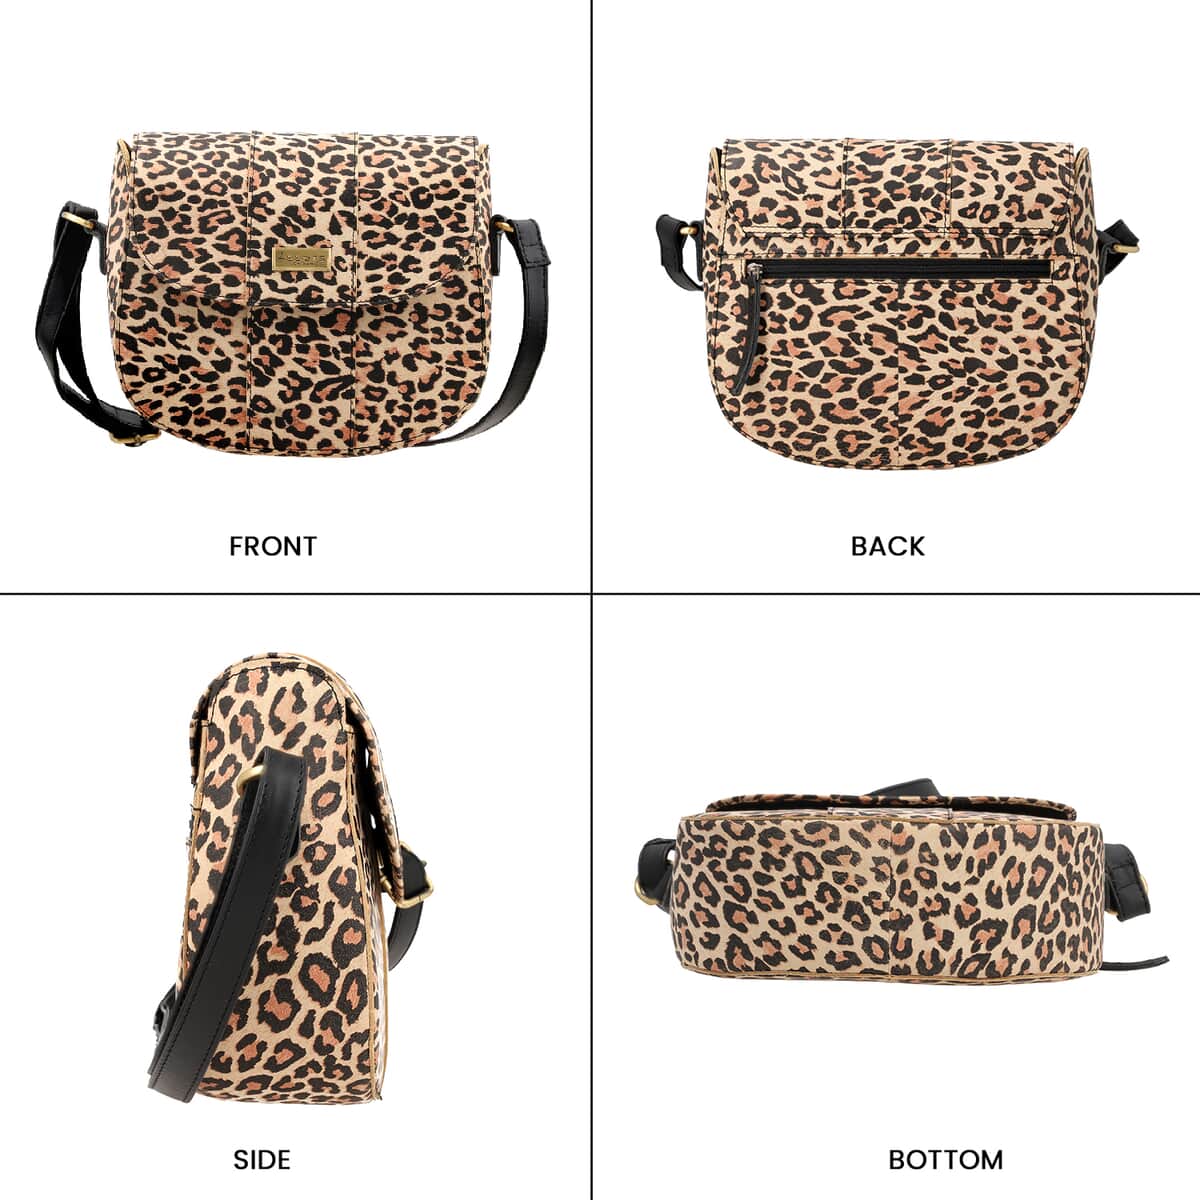 100% Genuine Leather Leopard Print Crossbody Sling Bag Size: 8.66(L)x8.07(H)x3.13(W) Inches Color: Brown image number 3